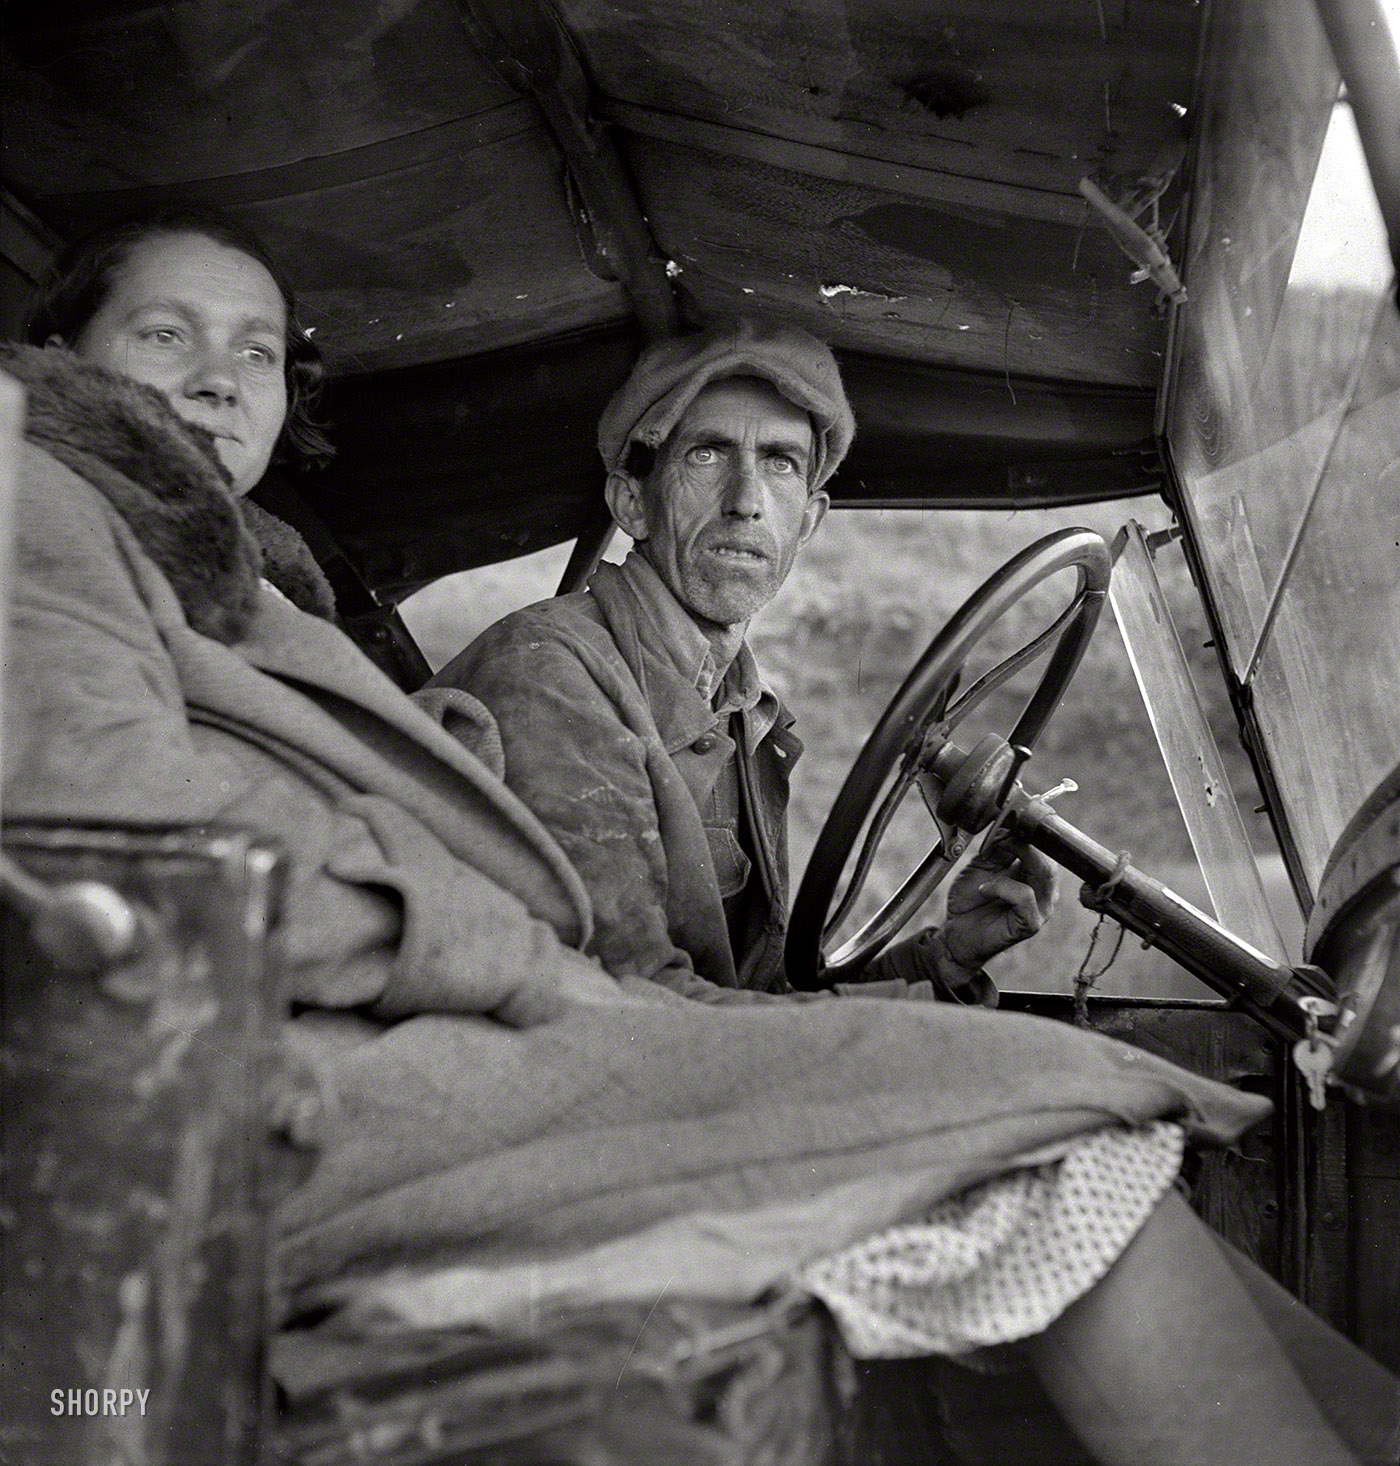 February 1936. "Once a Missouri farmer, now a migratory farm laborer on the Pacific Coast, California." A possible prequel to The Grapes of Wrath. Photo by Dorothea Lange for the Farm Security Administration. View full size.